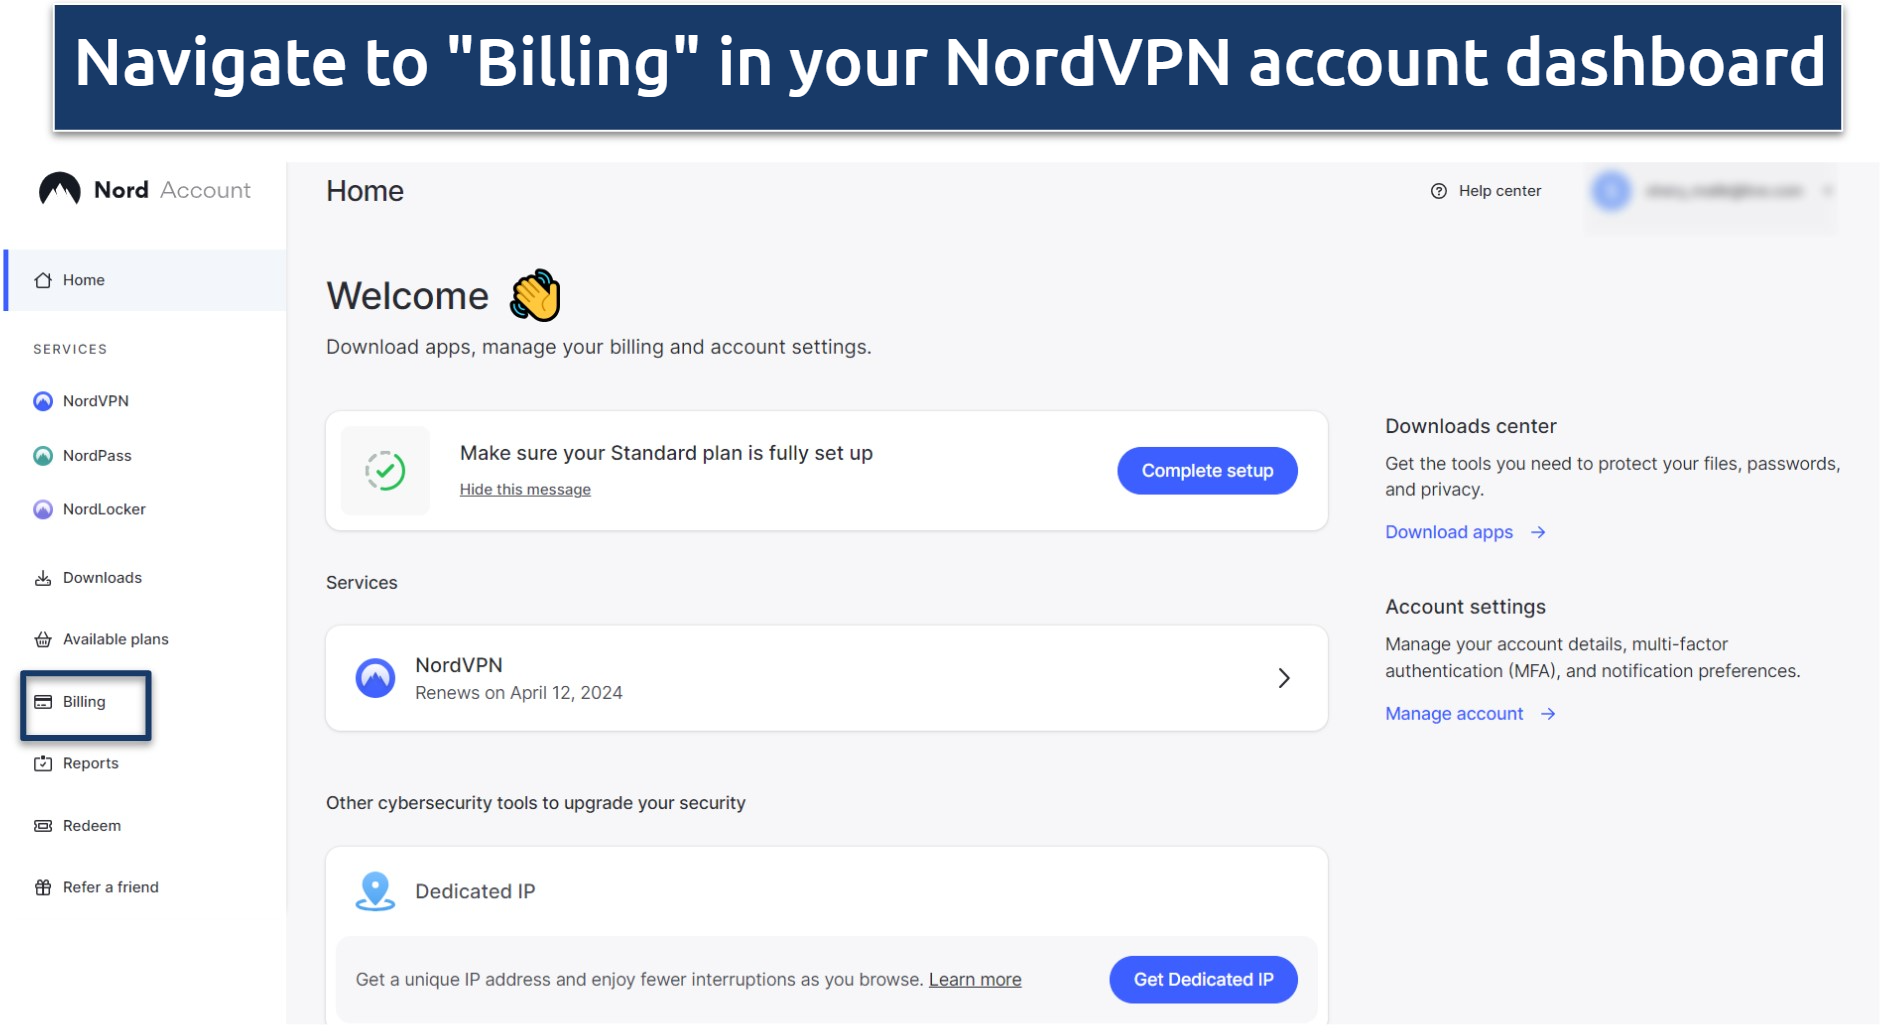 Image showing how to navigate to the billings section on NordVPN's account dashboard.